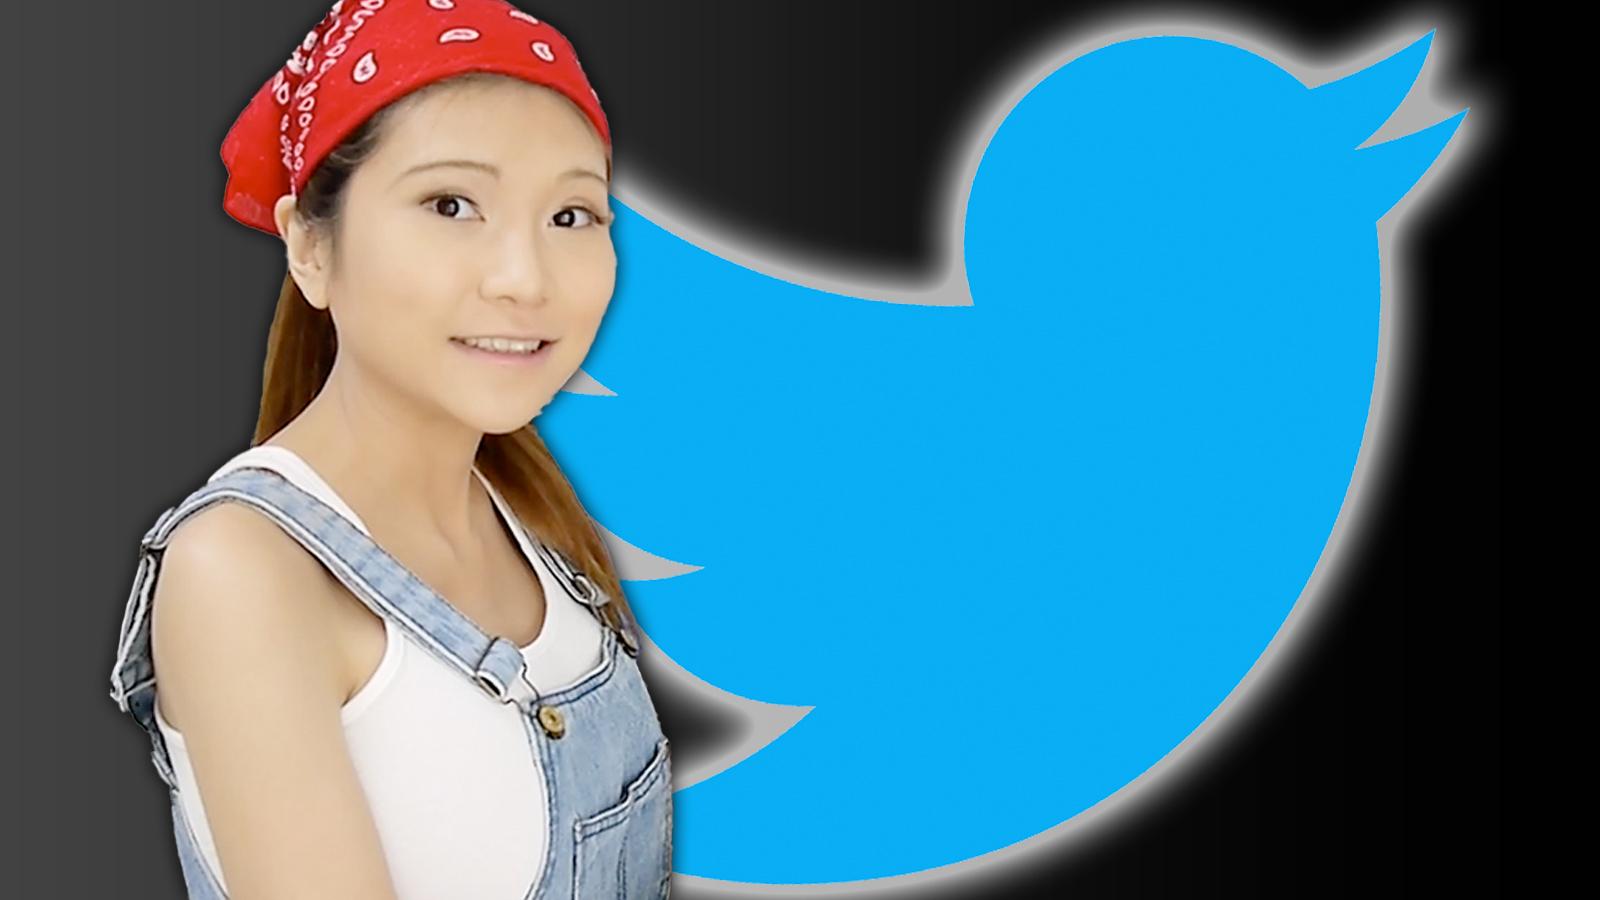 Naomi Wu with the Twitter logo in the background